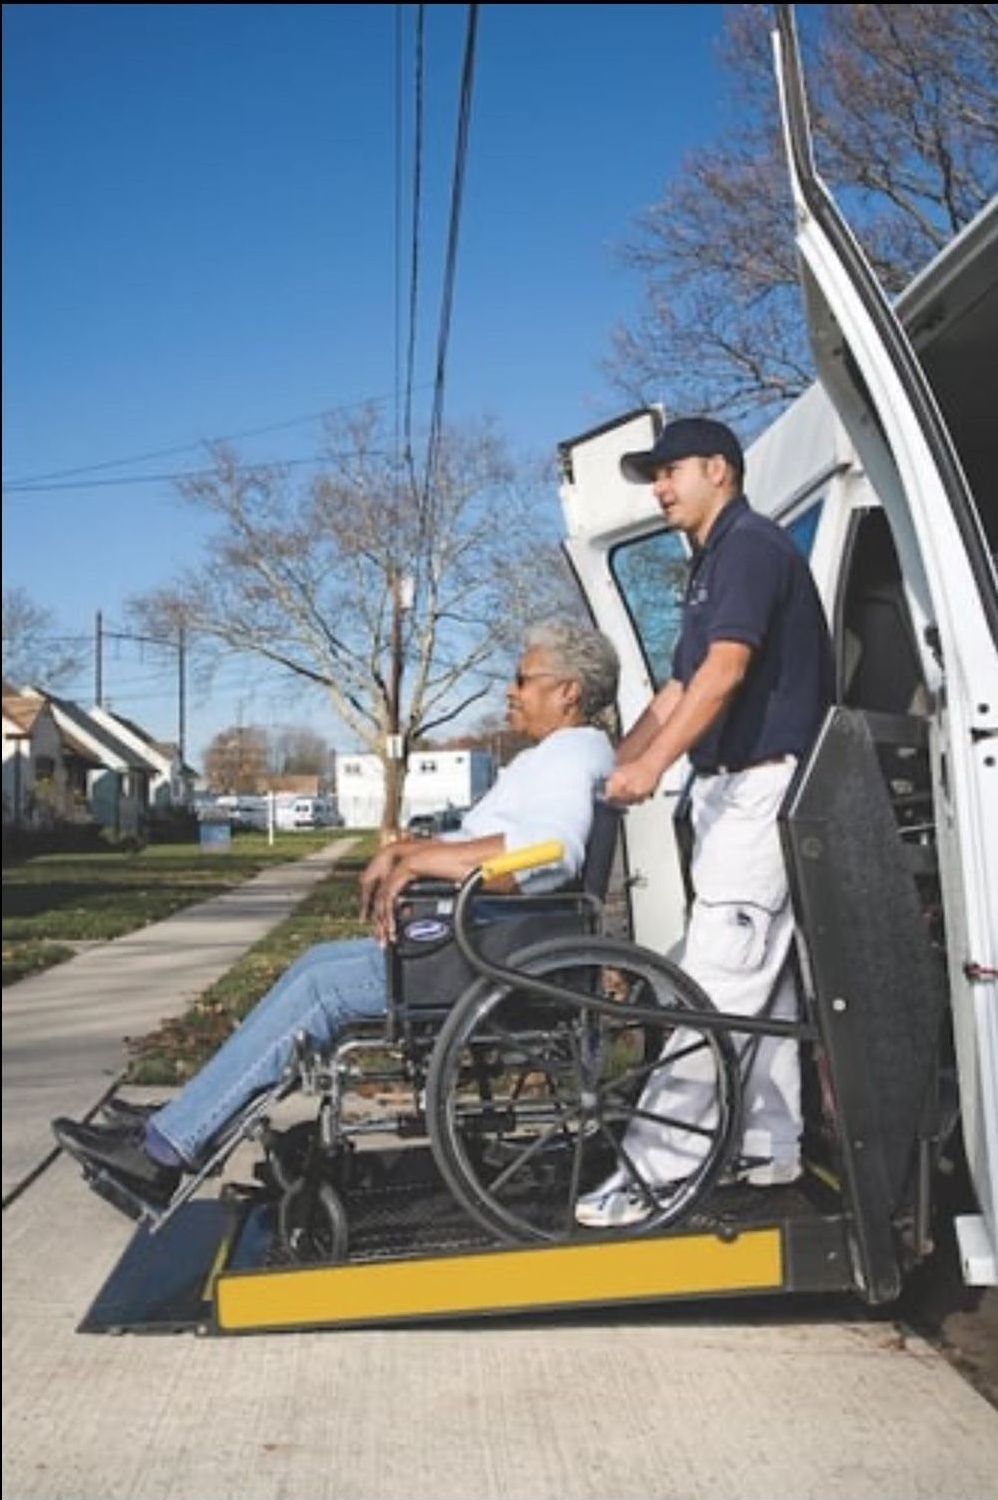 Mobility Van for Disabled People